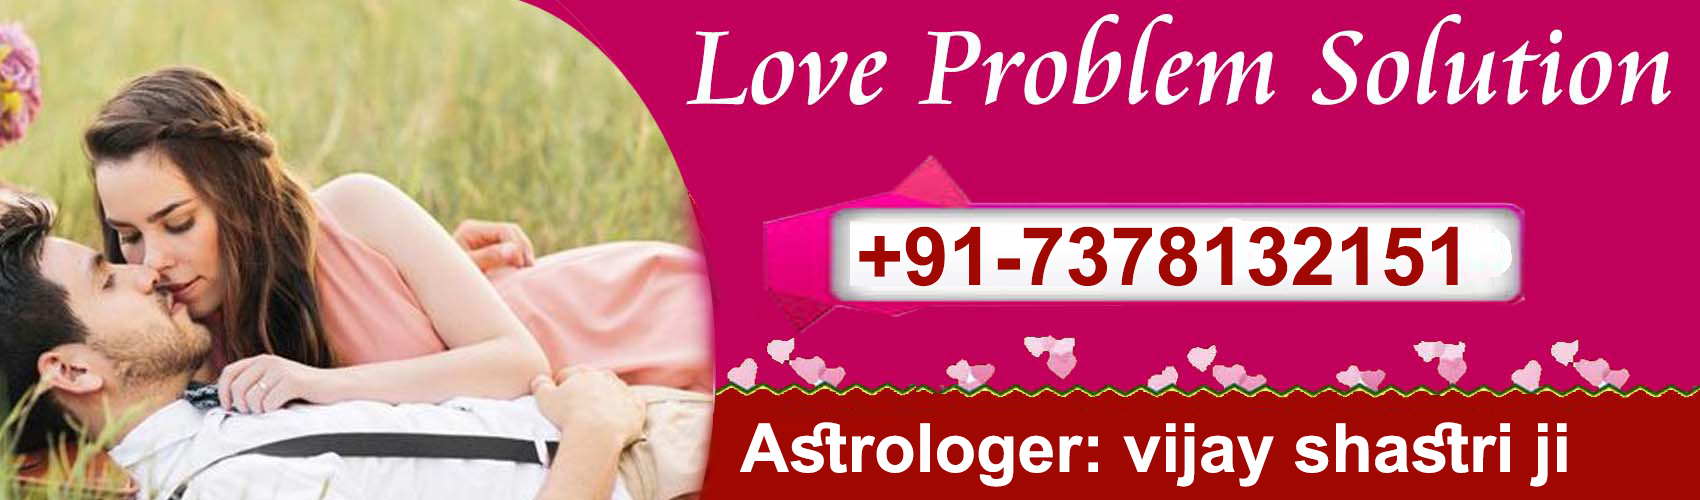 love problem solution one call